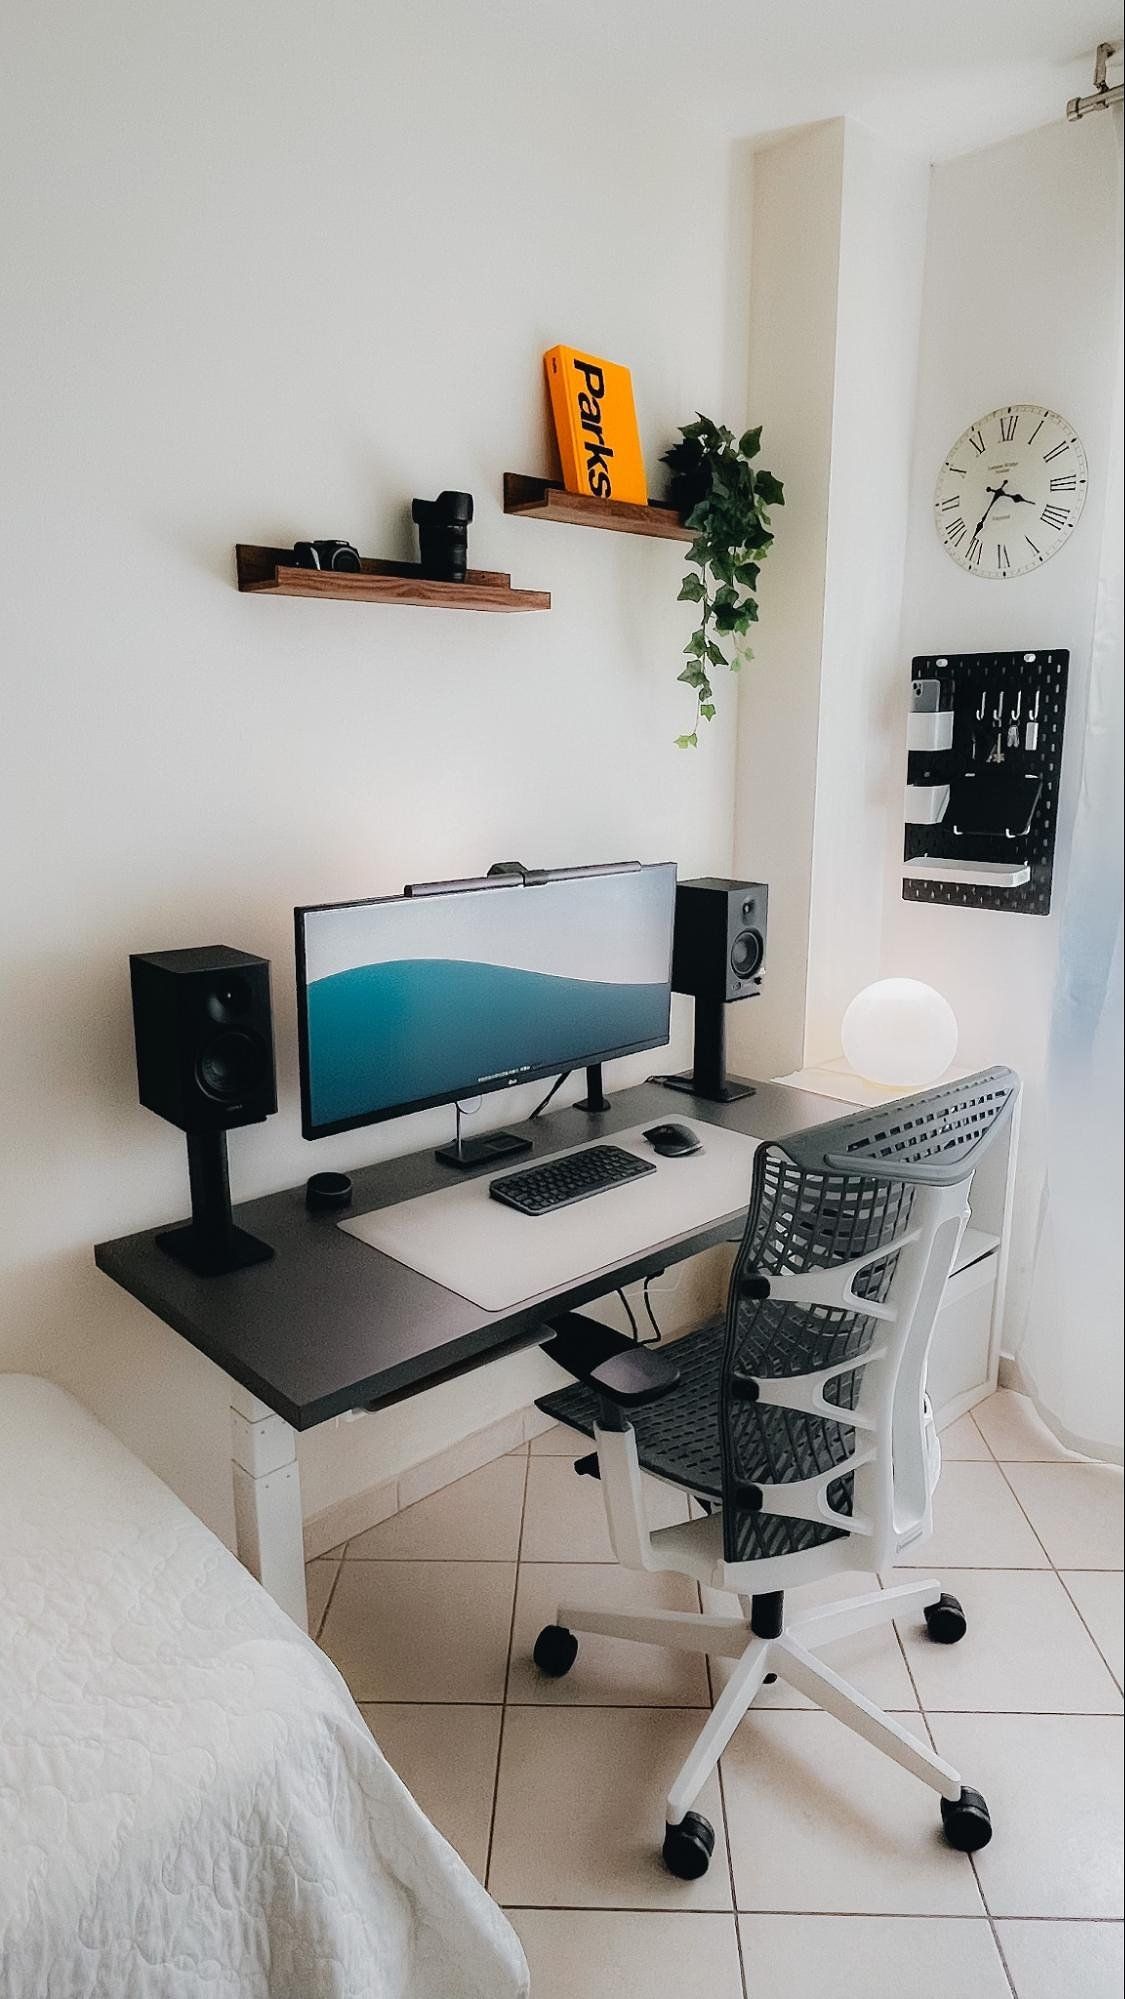 A minimal and clean bedroom desk setup for working from home